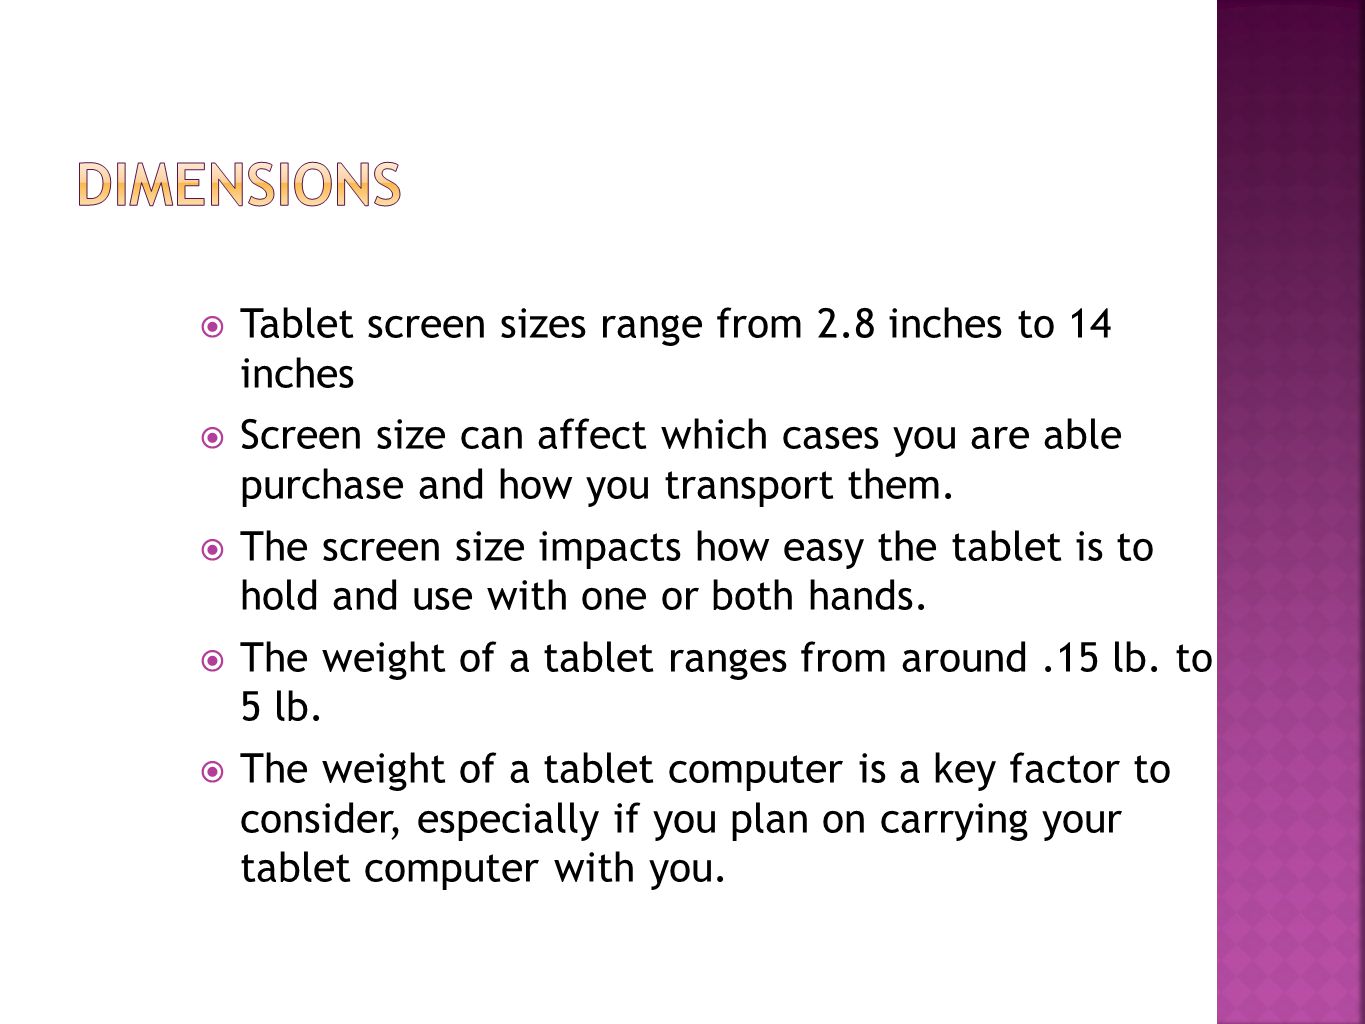  Tablet screen sizes range from 2.8 inches to 14 inches  Screen size can affect which cases you are able purchase and how you transport them.